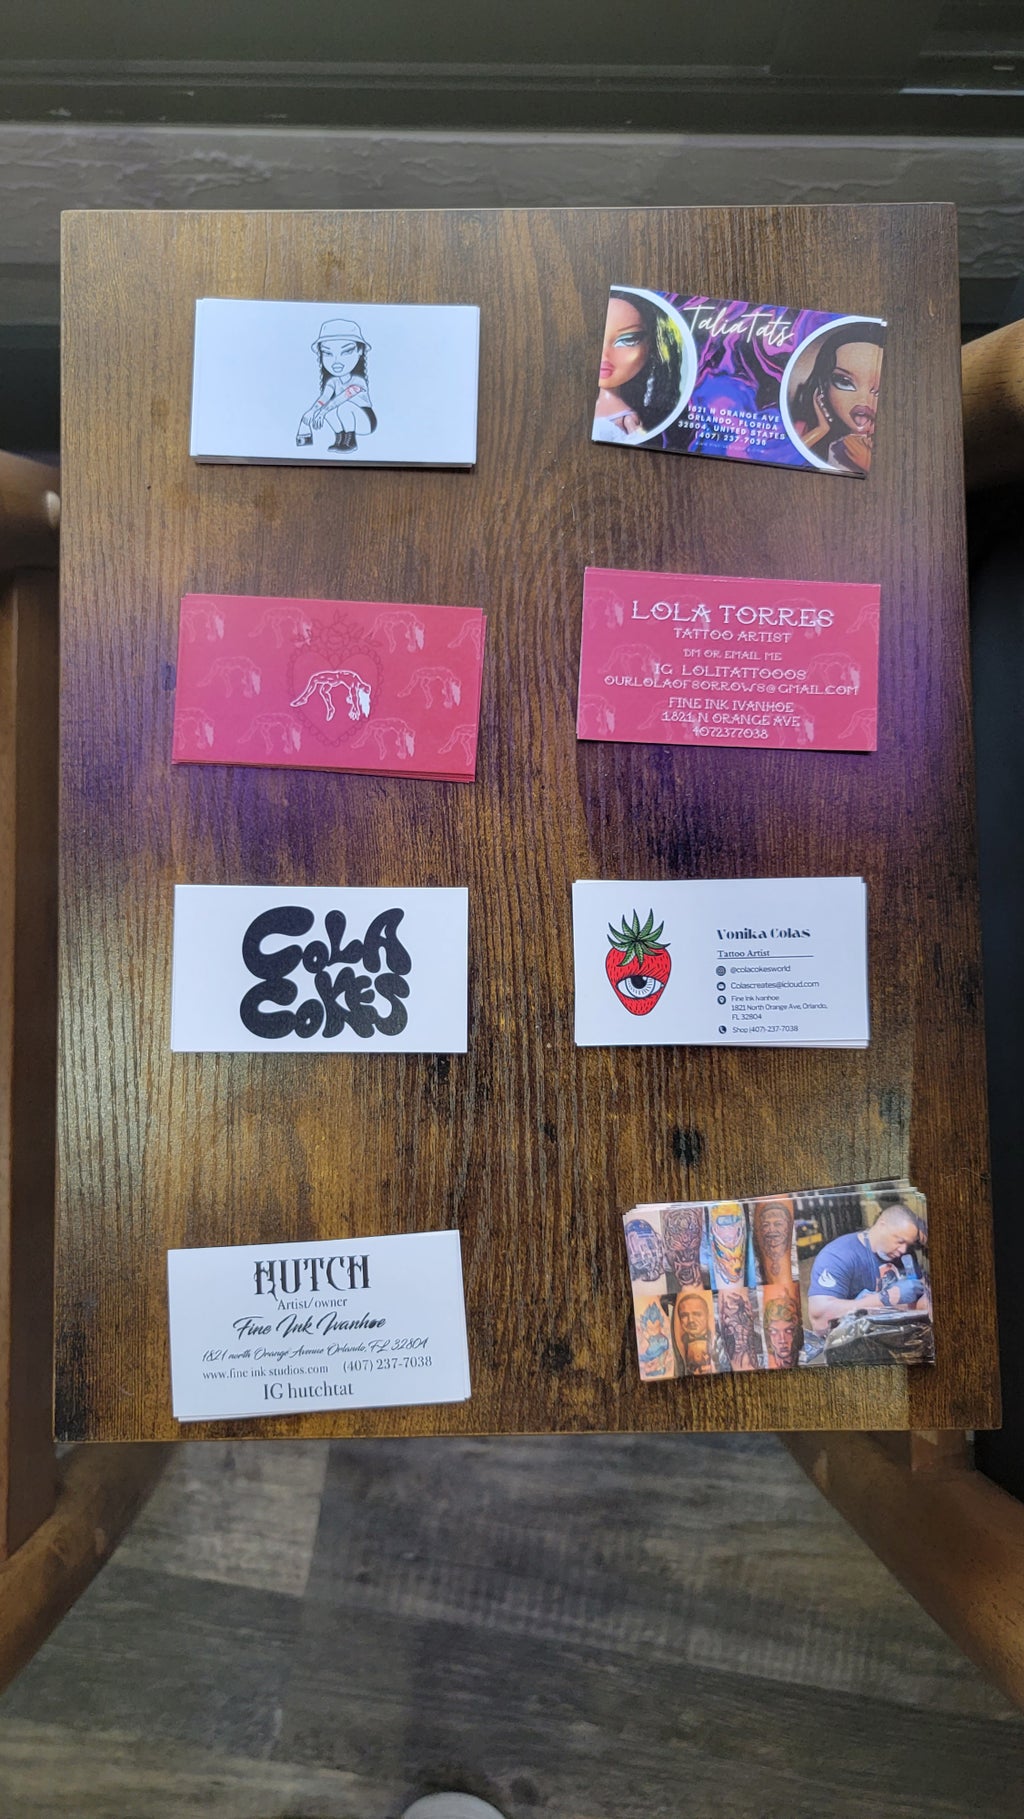 Business cards of all the artists mentioned